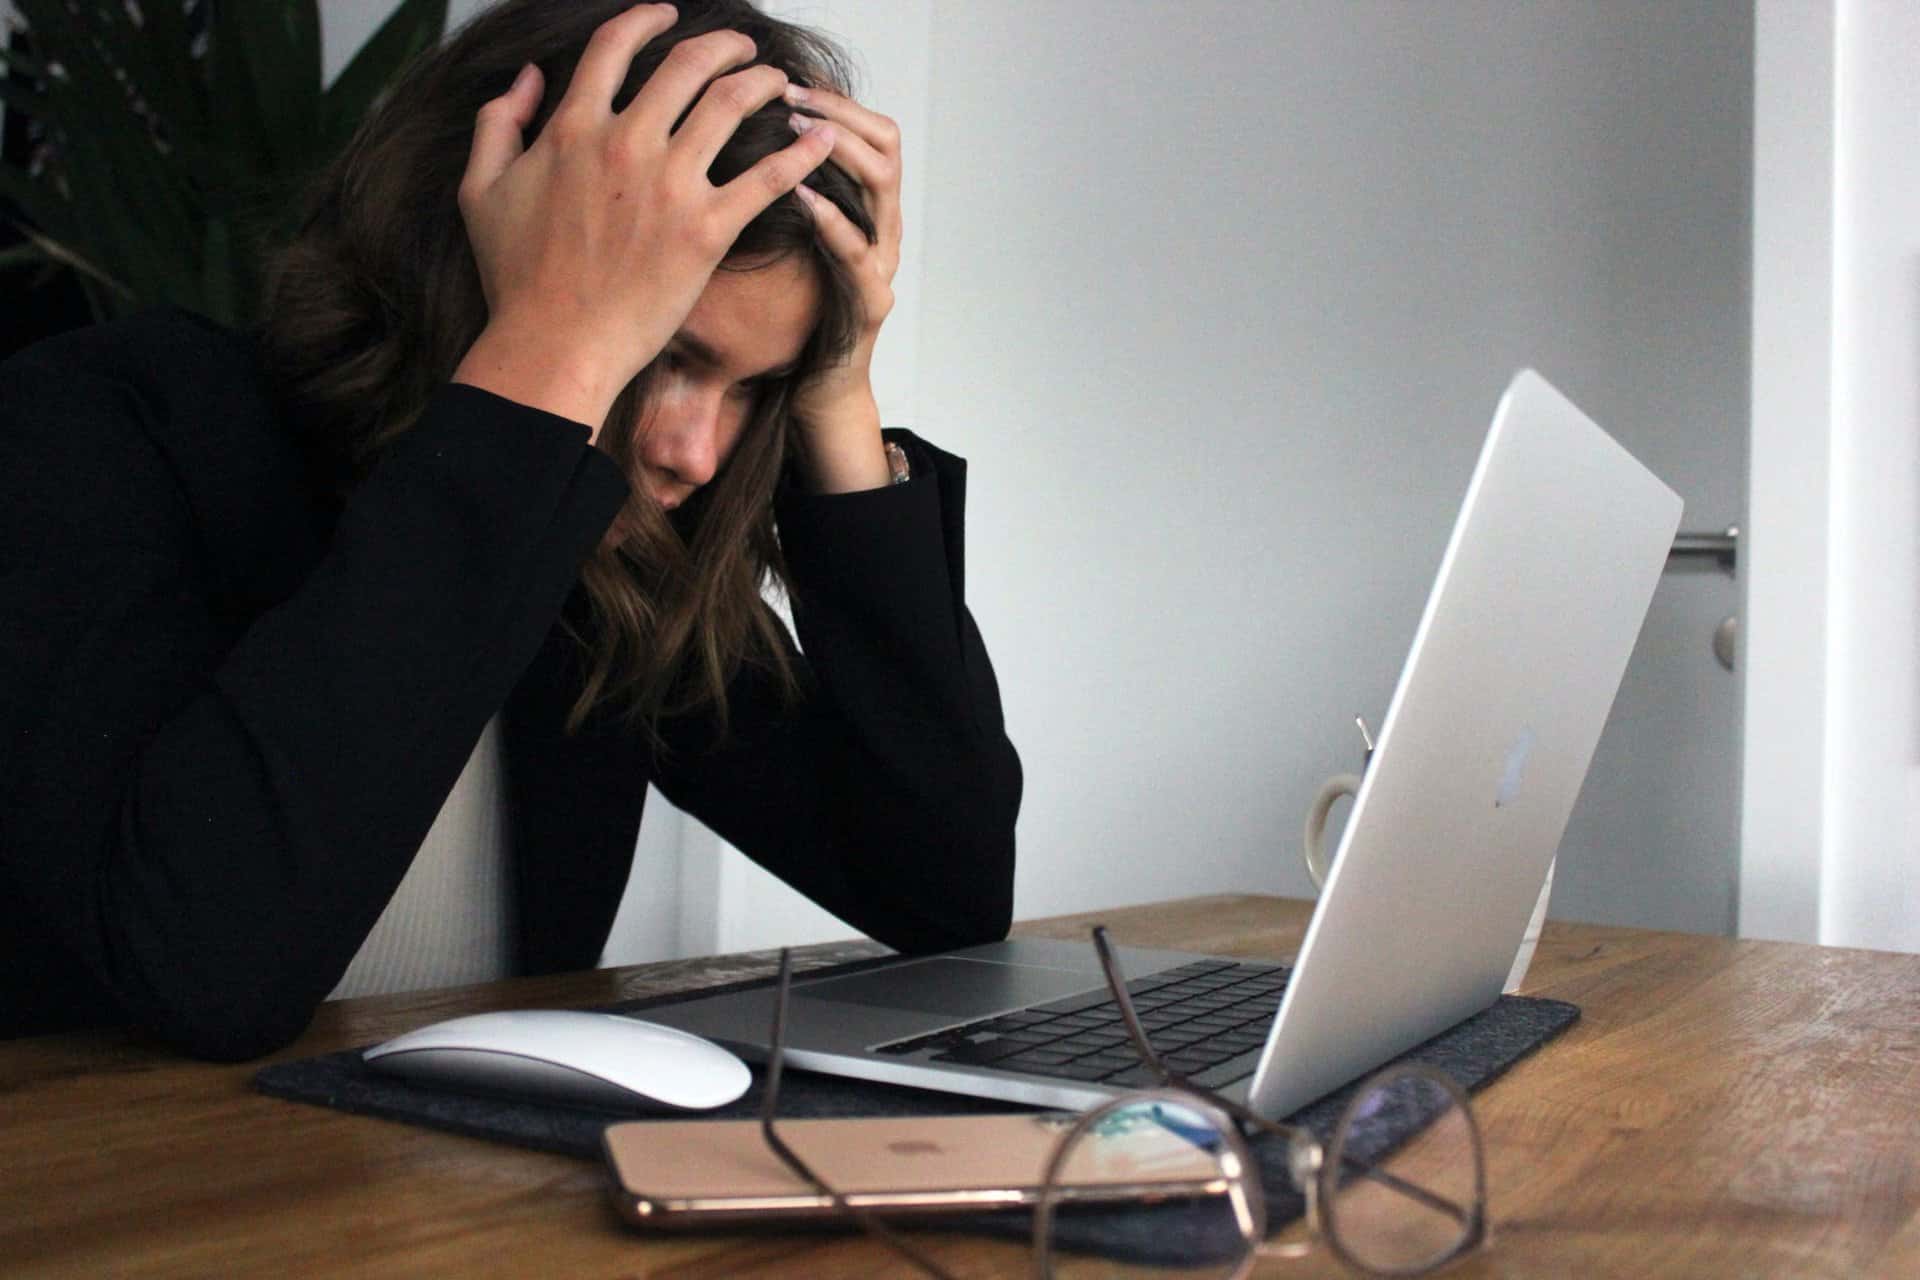 Woman looking at a laptop screen with her hands on her head in frustration